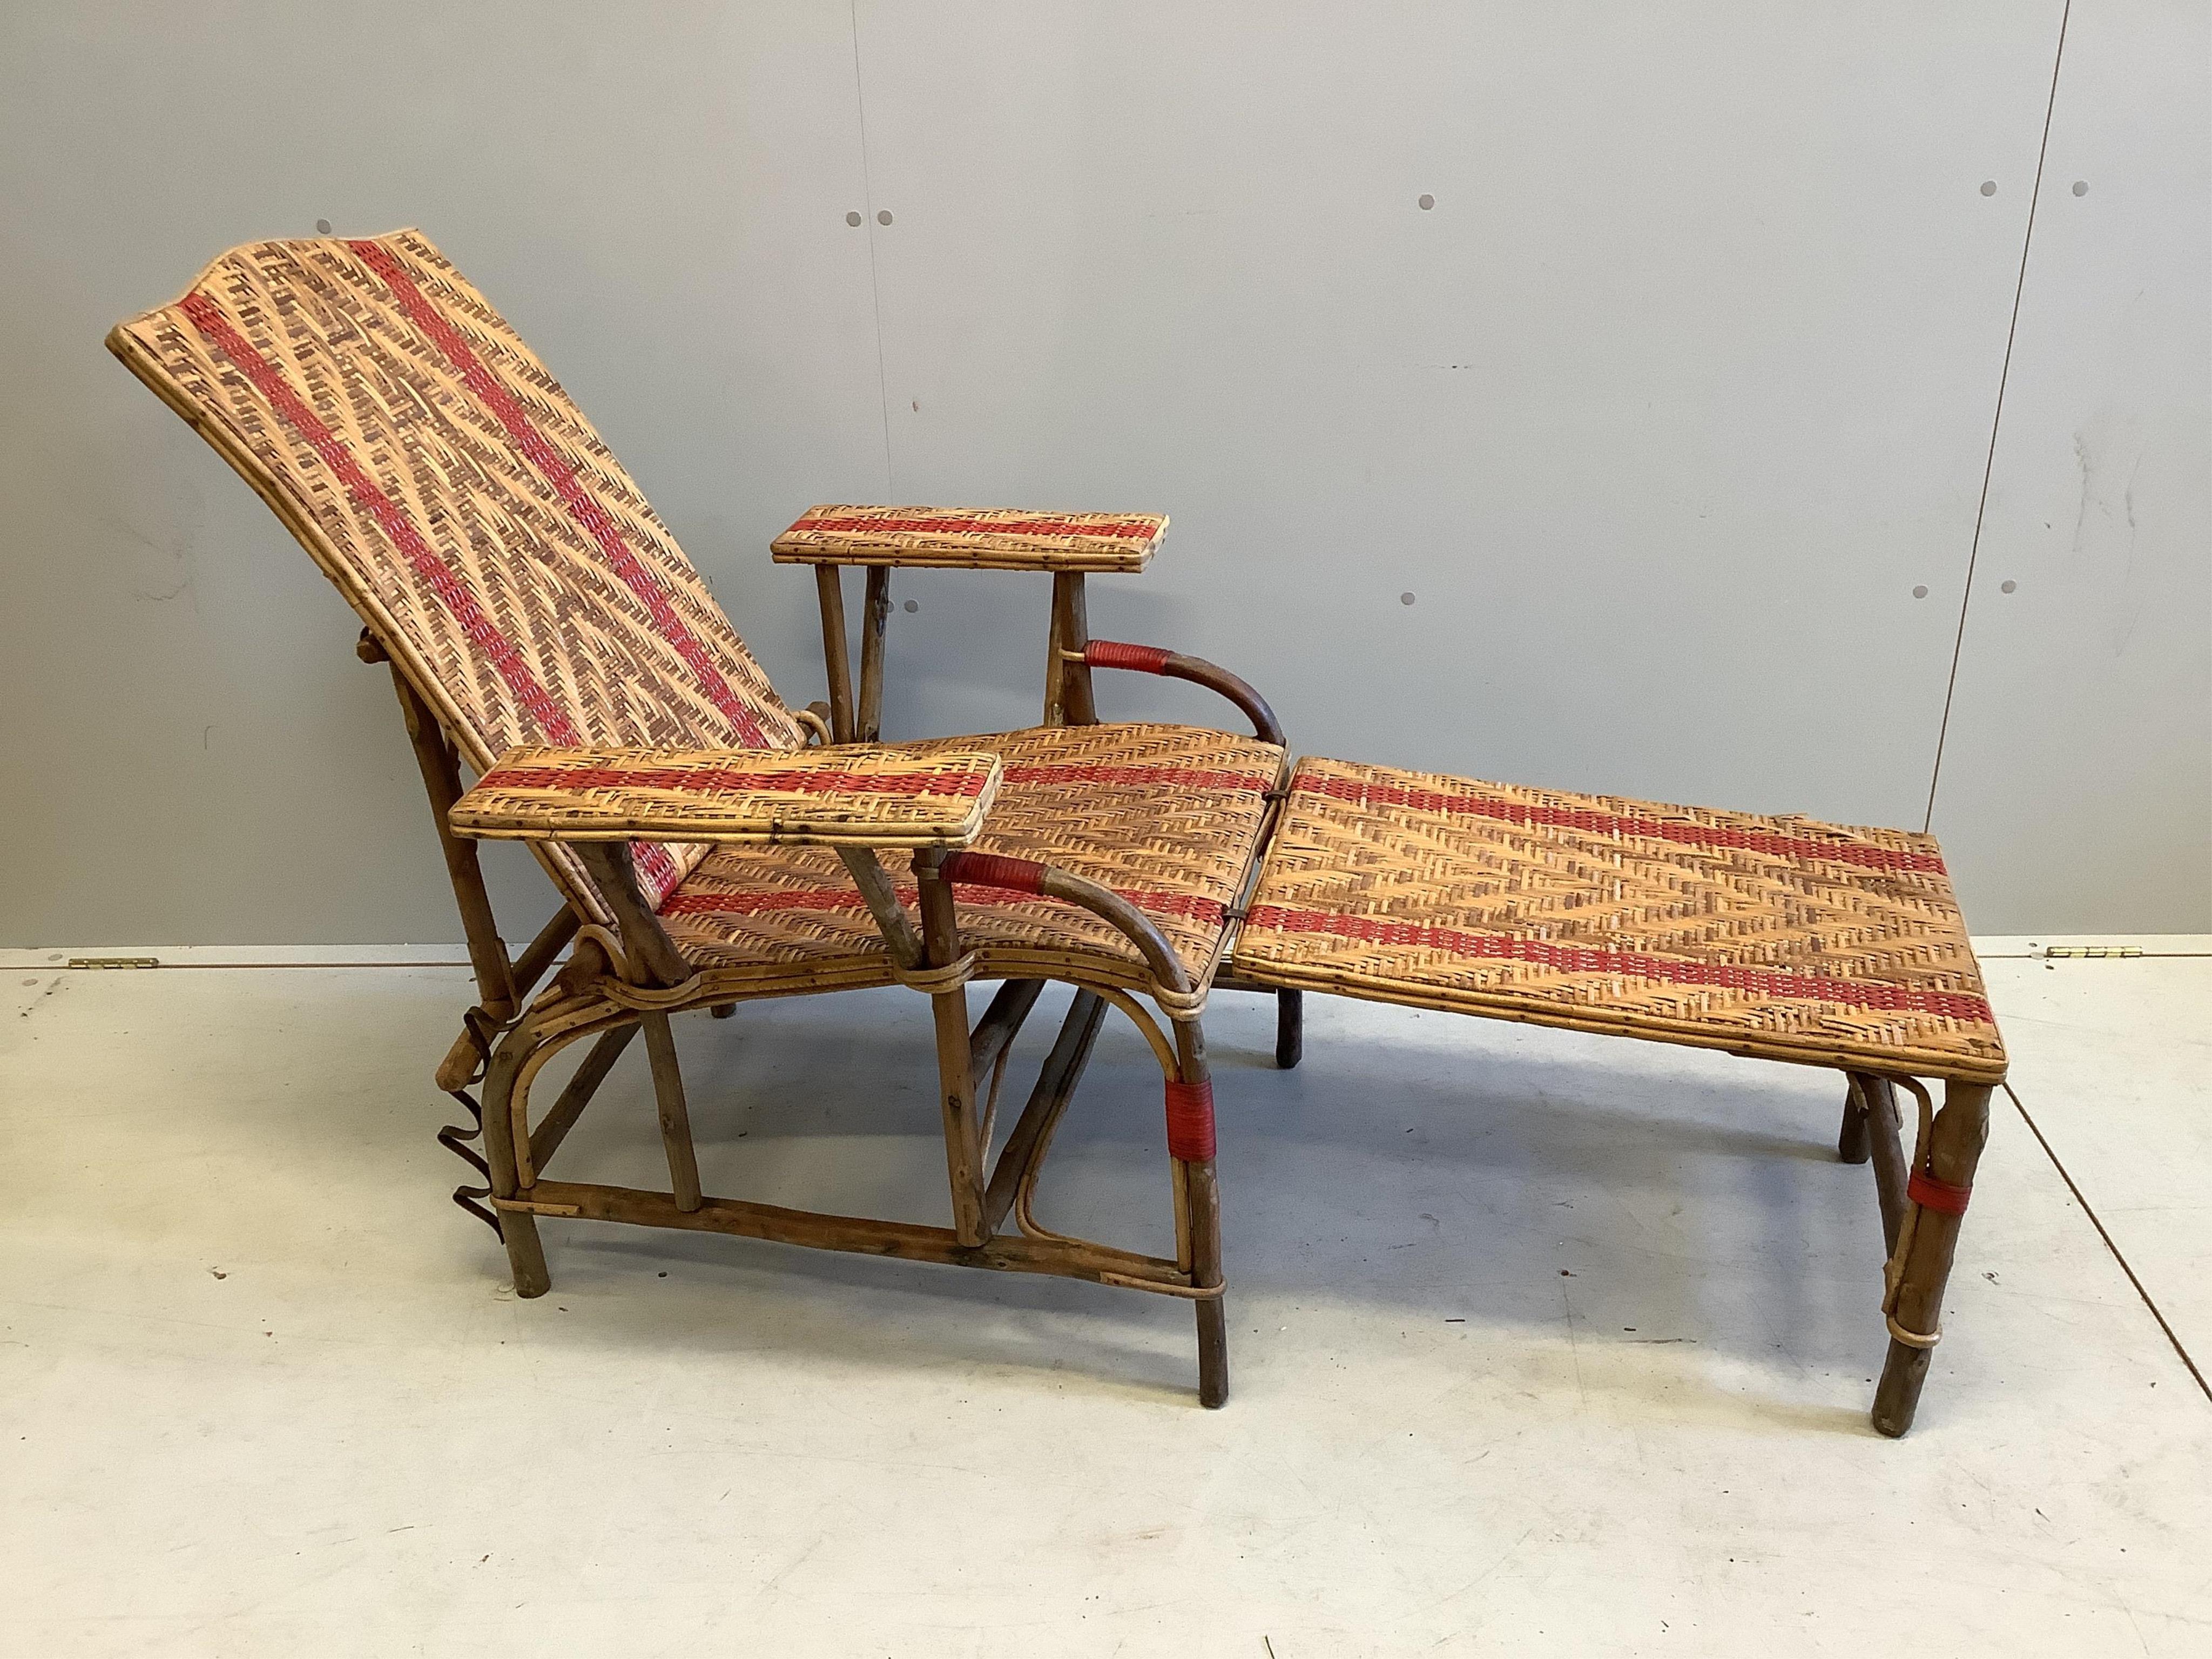 A vintage French caned bamboo reclining garden chair with footrest